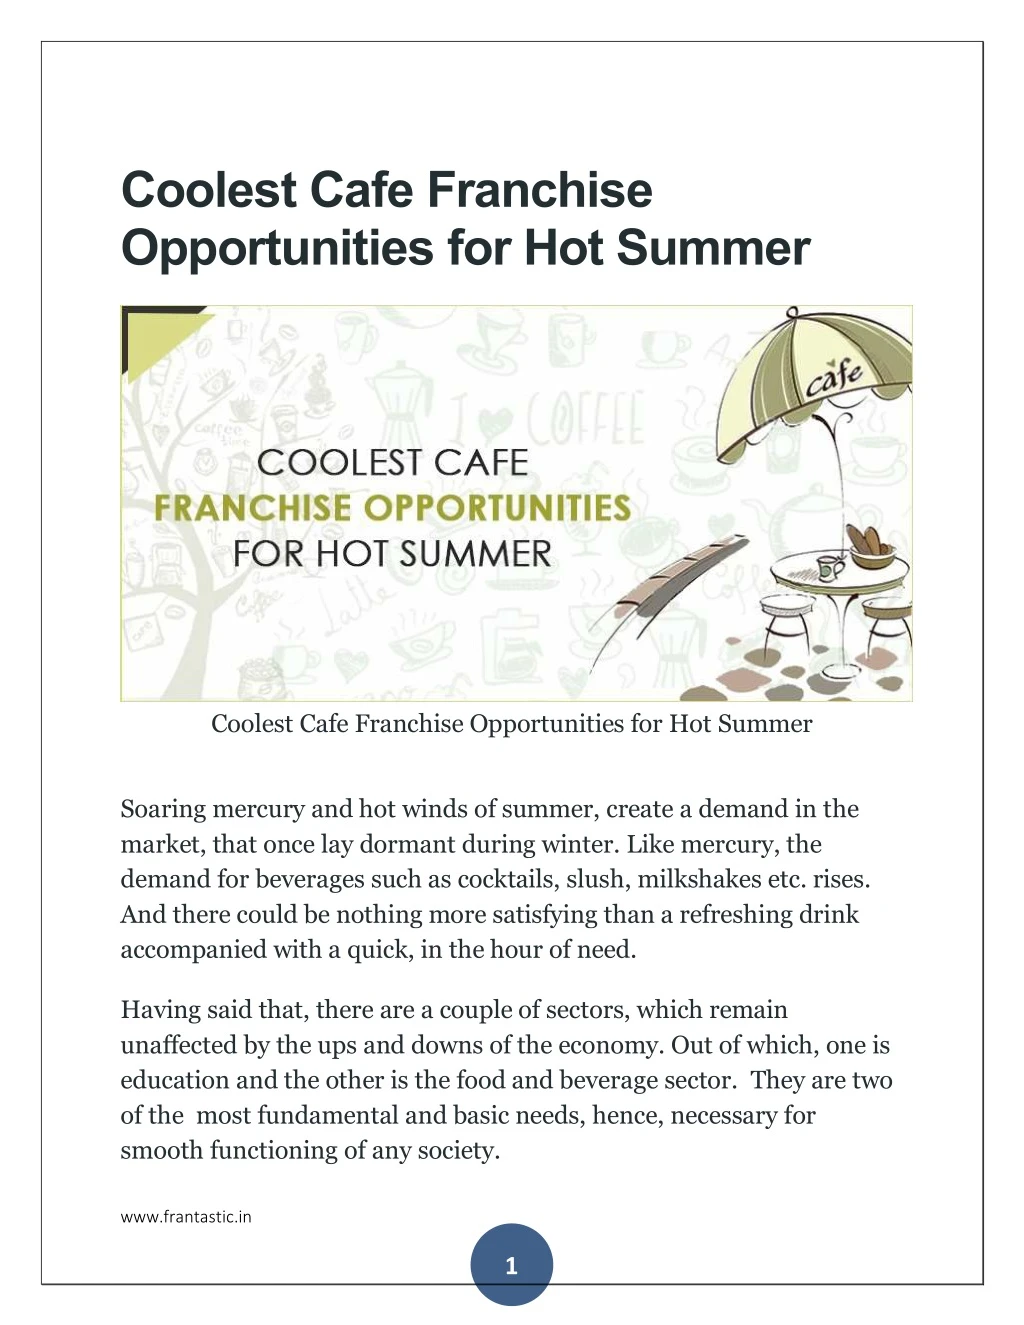 coolest cafe franchise opportunities